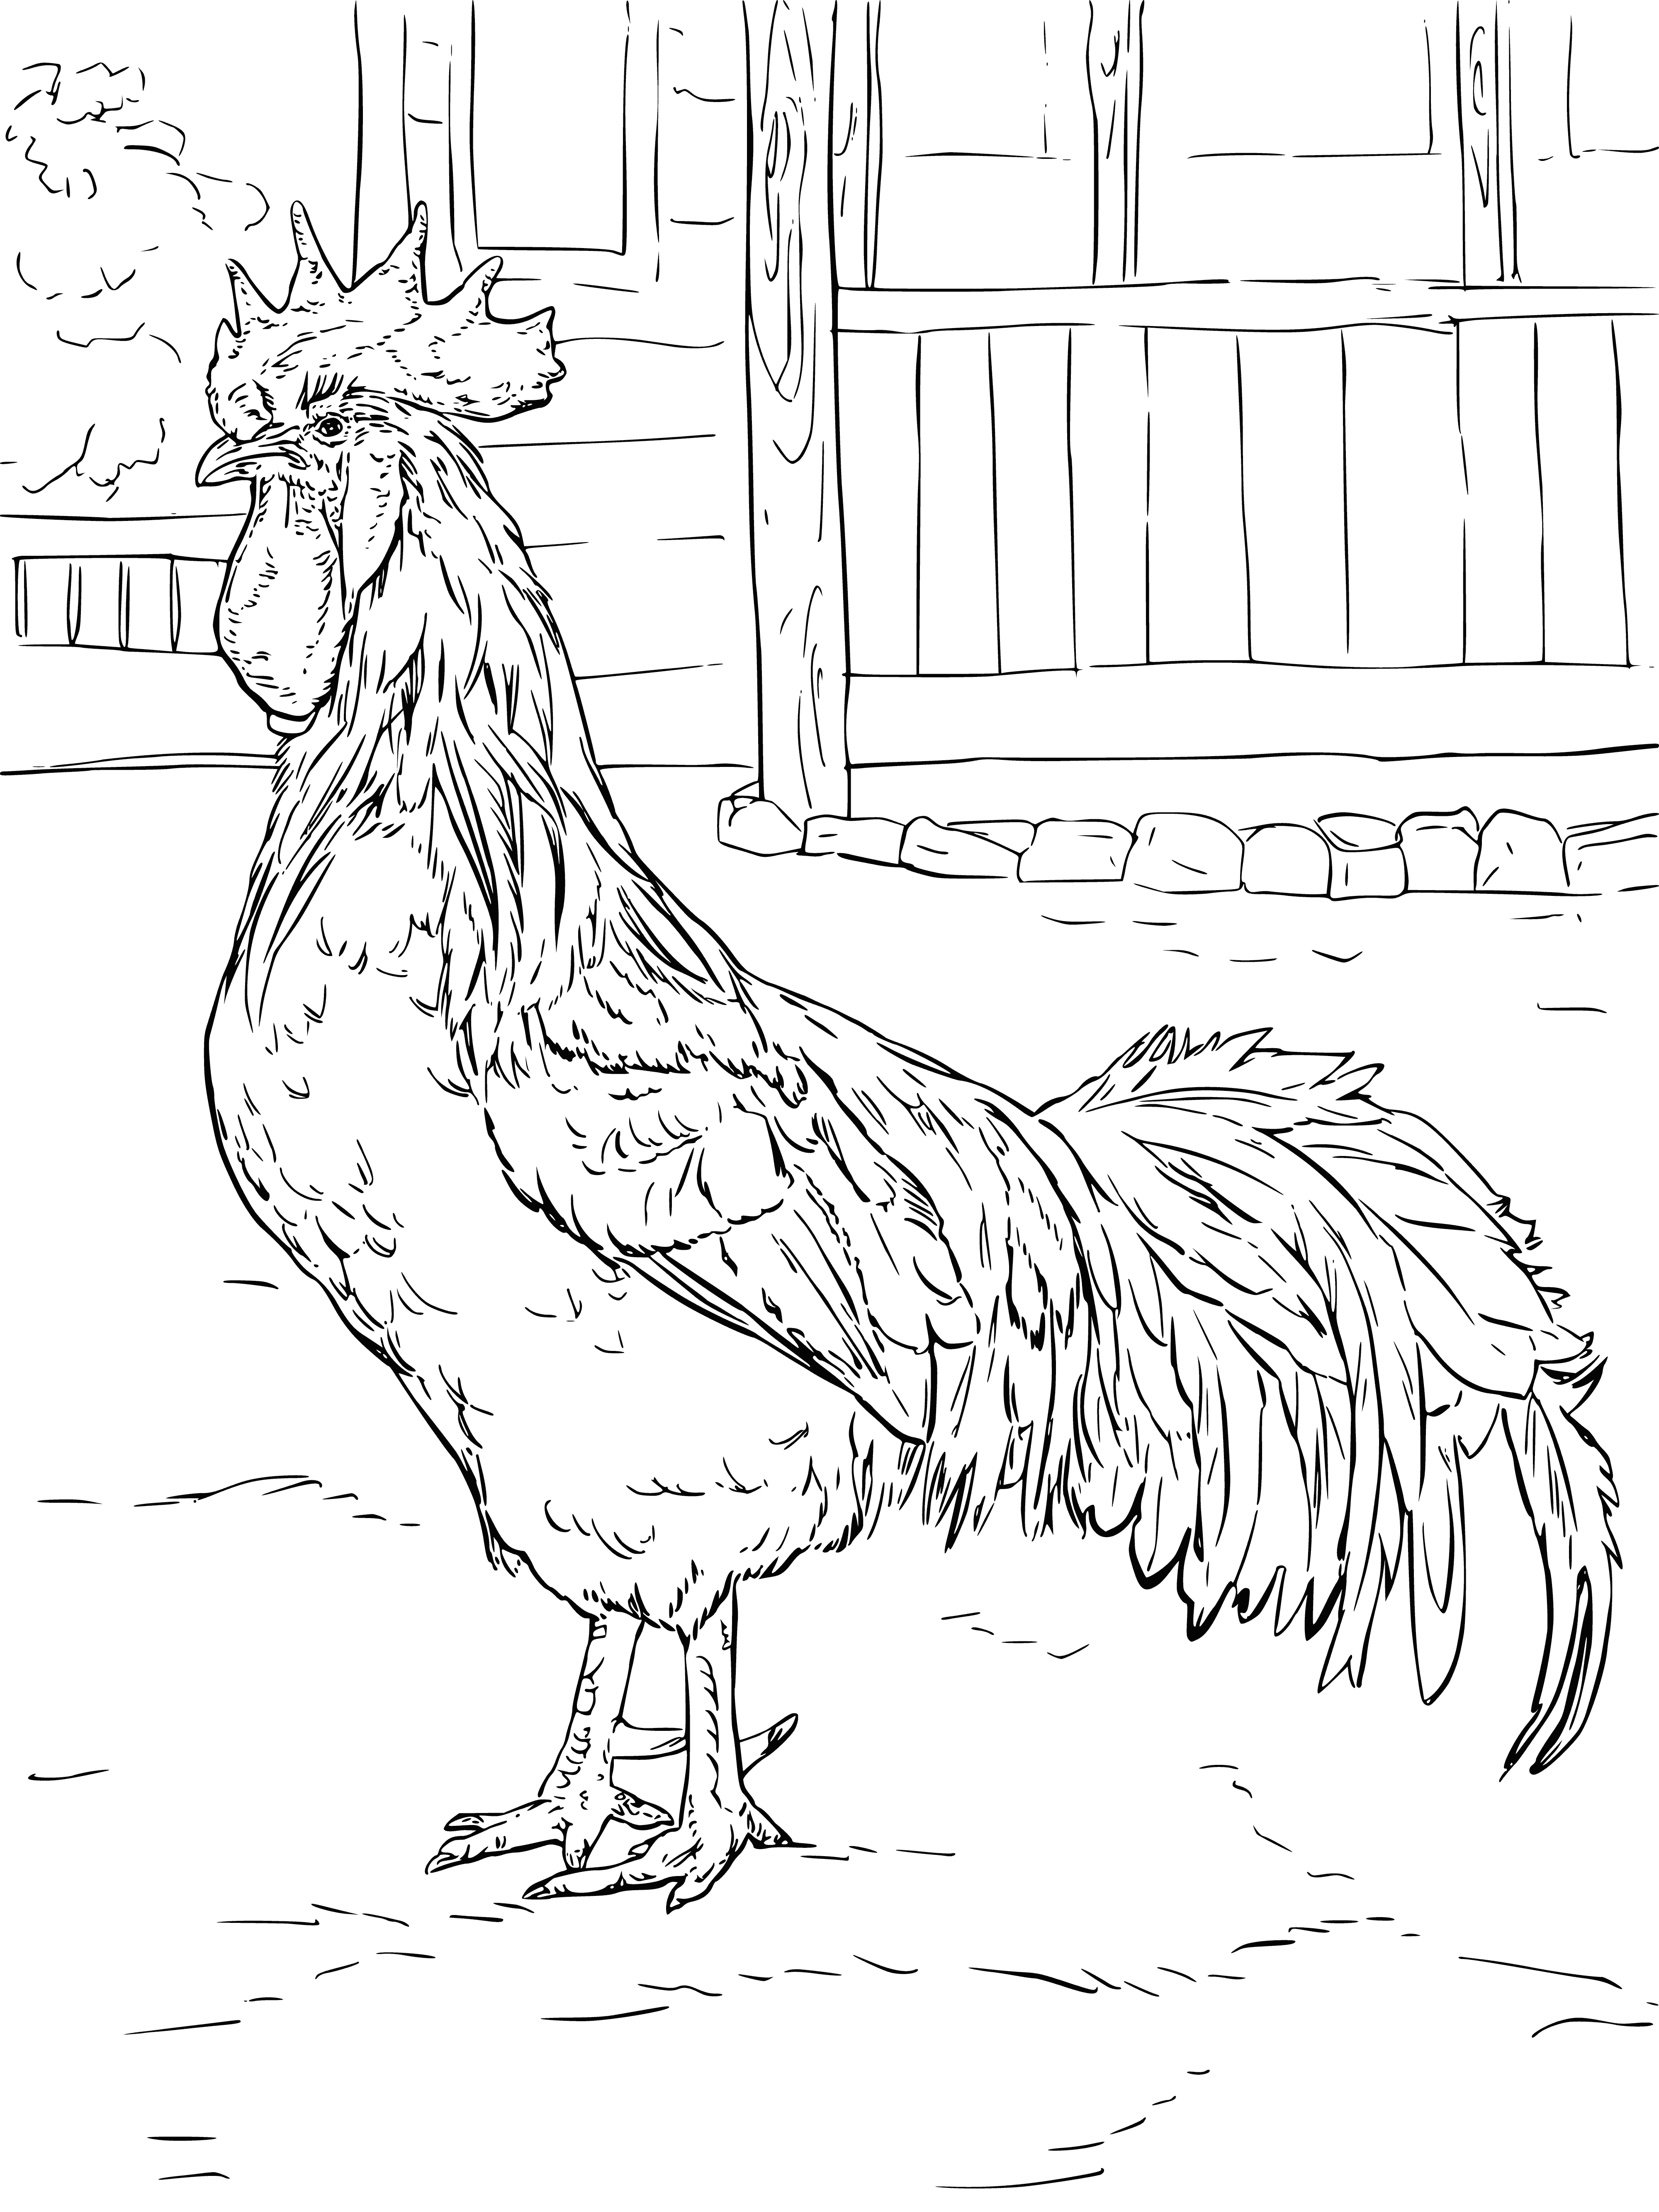 Rooster in the yard coloring page